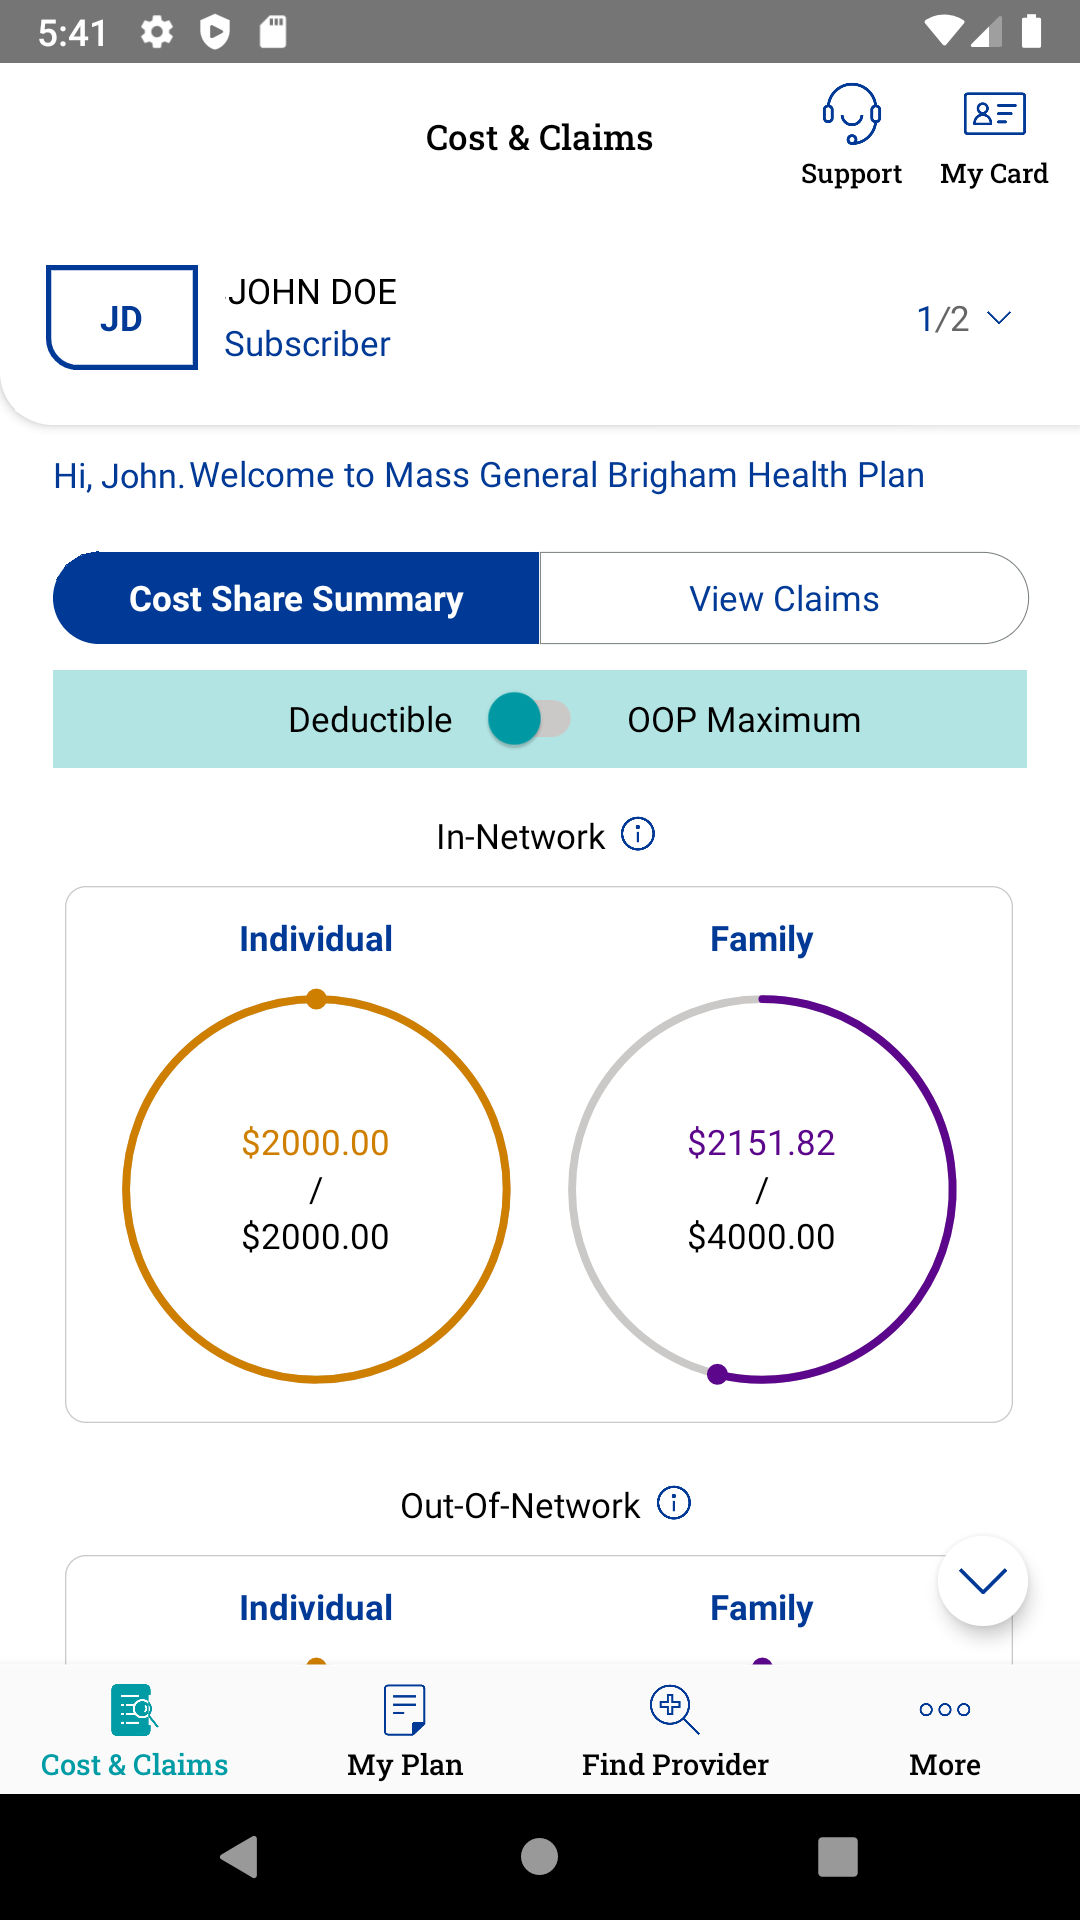 Costs & claims